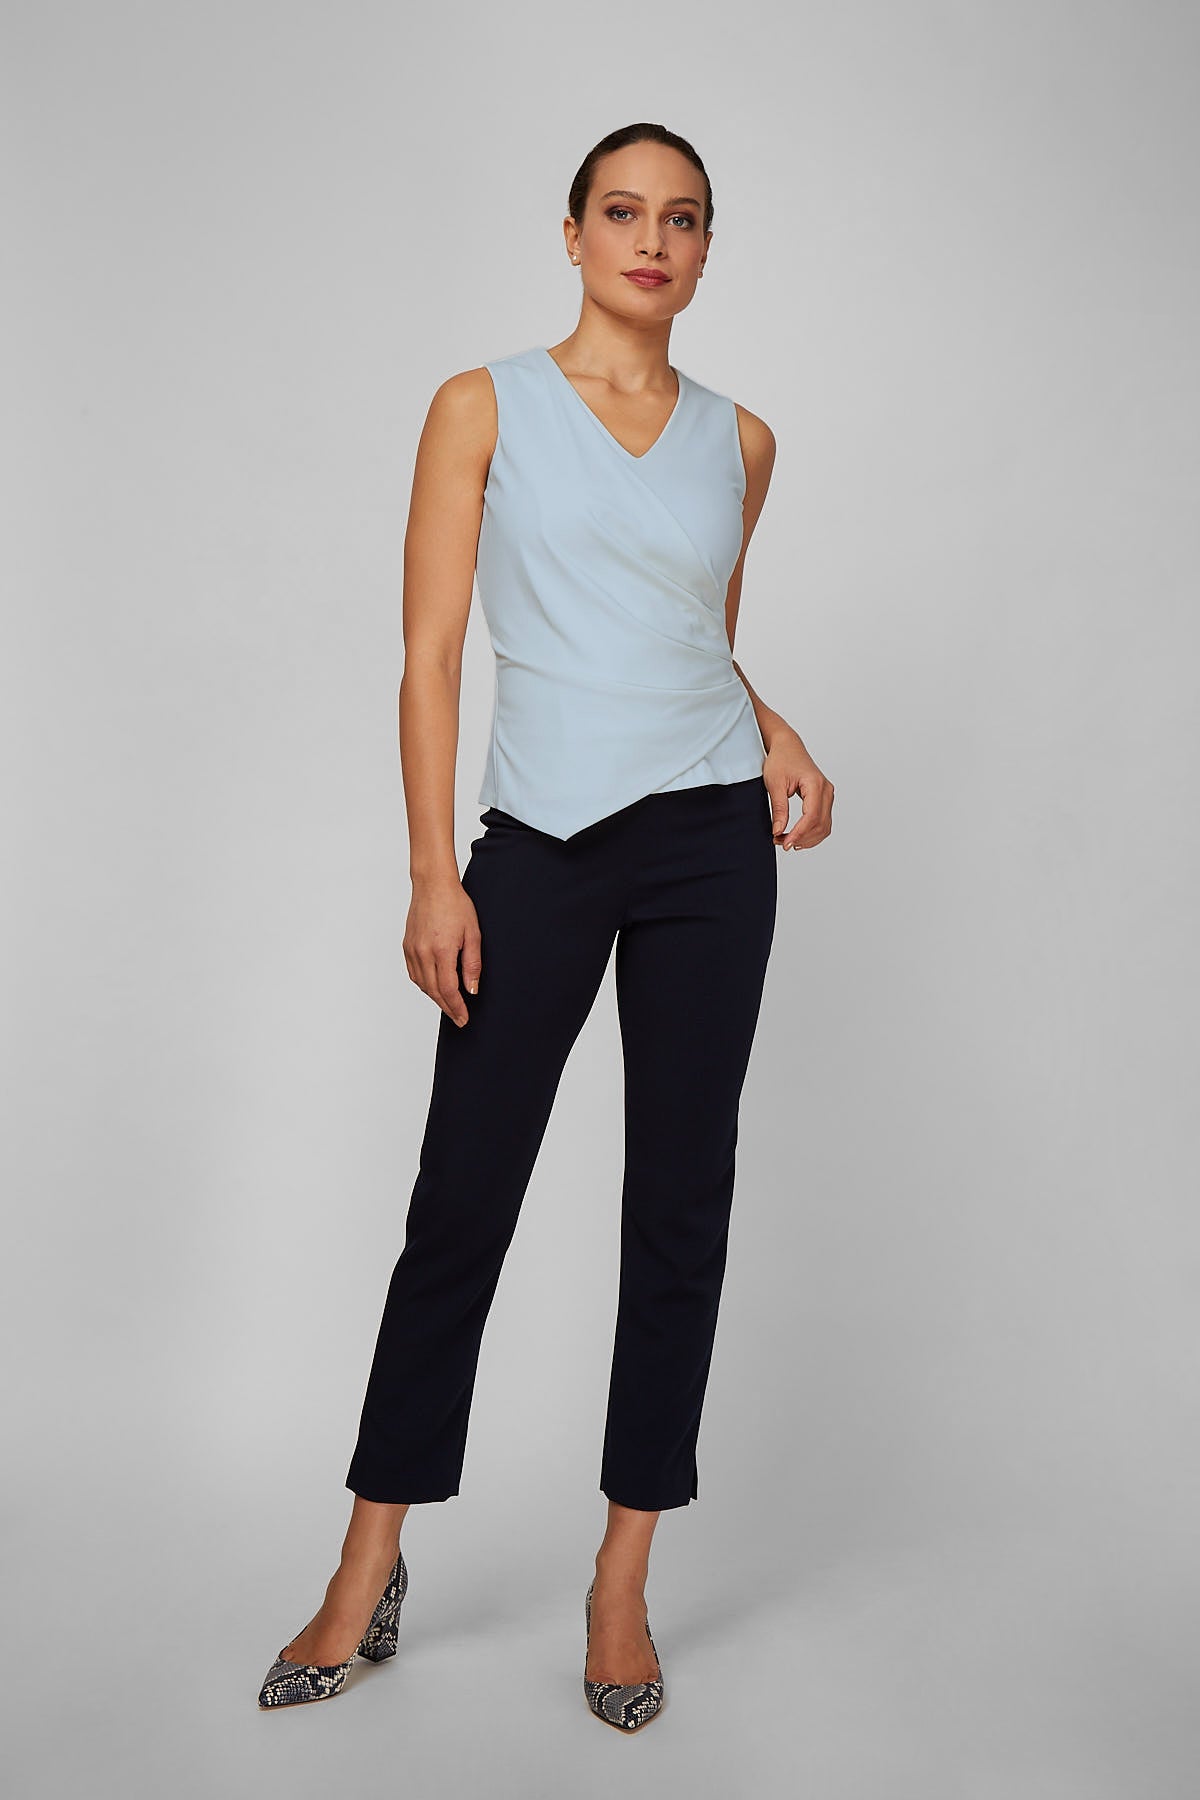 Women' Business Naomi Top - Baby Blue NORA GARDNER | OFFICIAL STORE for work and office